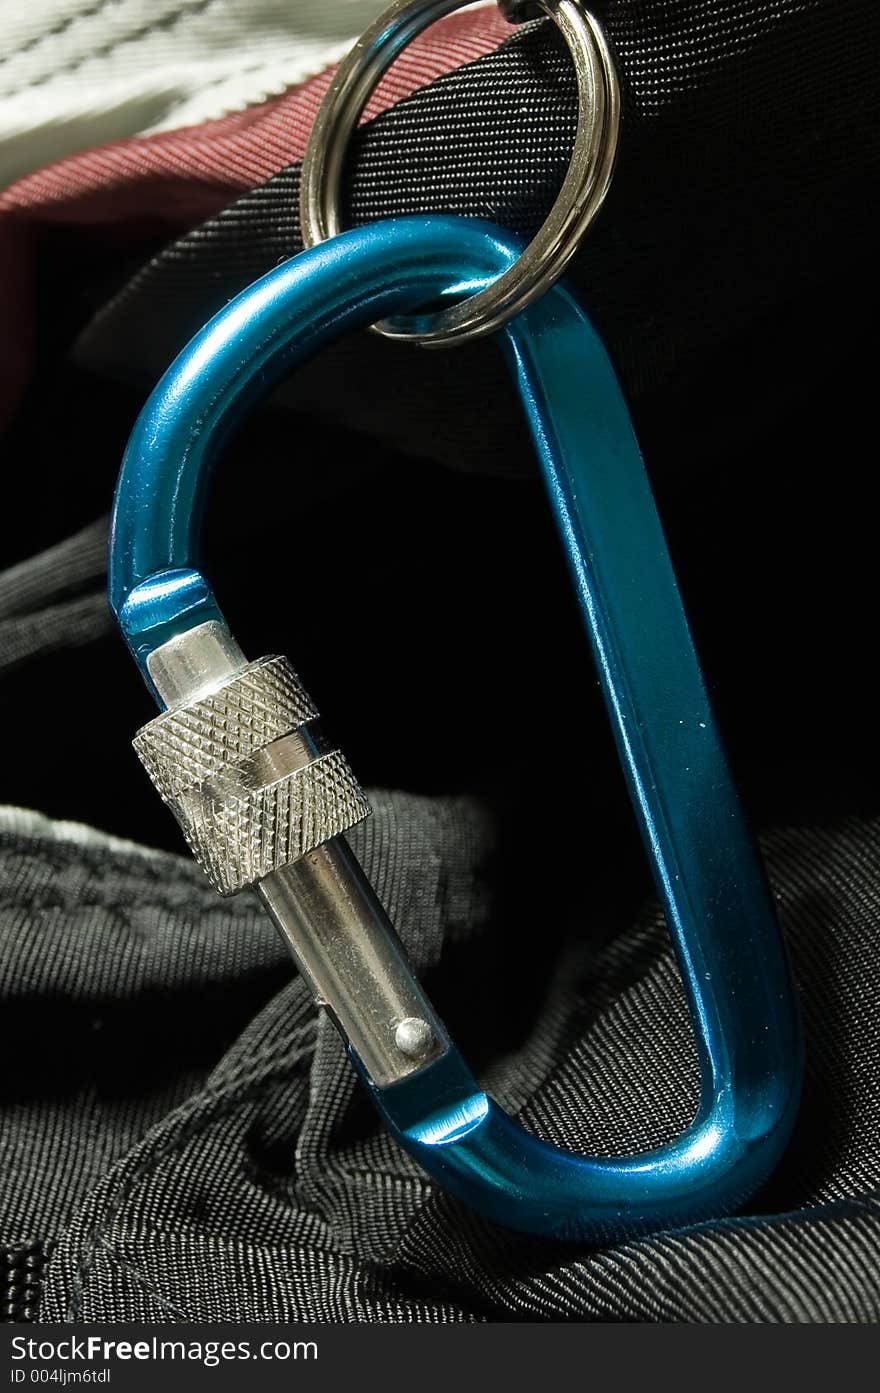 Carabiner used for climbing